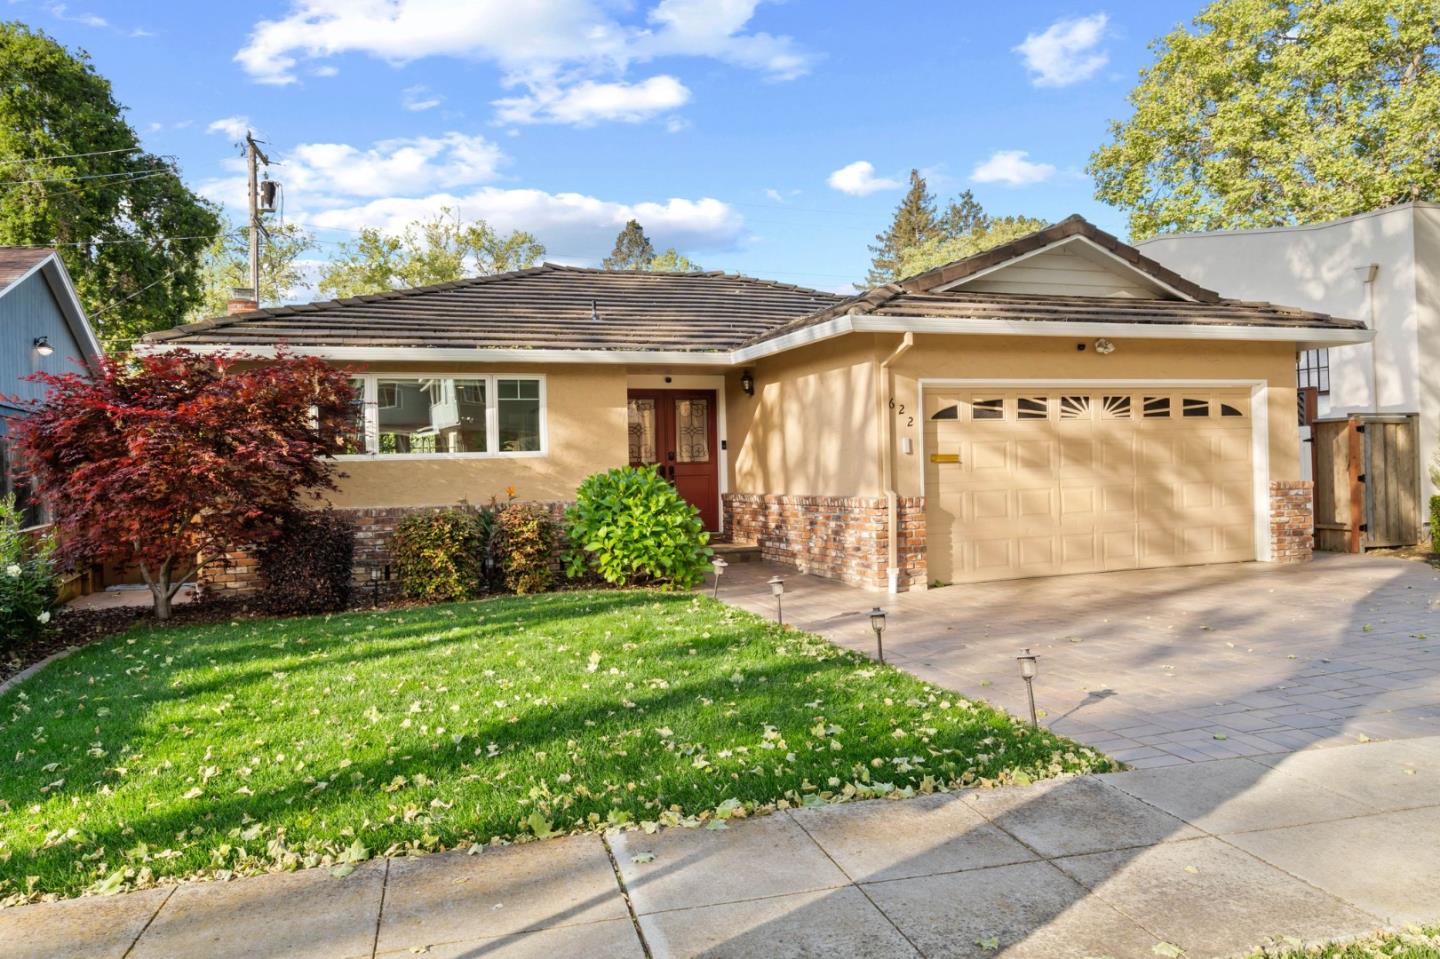 Photo of 622 Fairmont Ave in Mountain View, CA